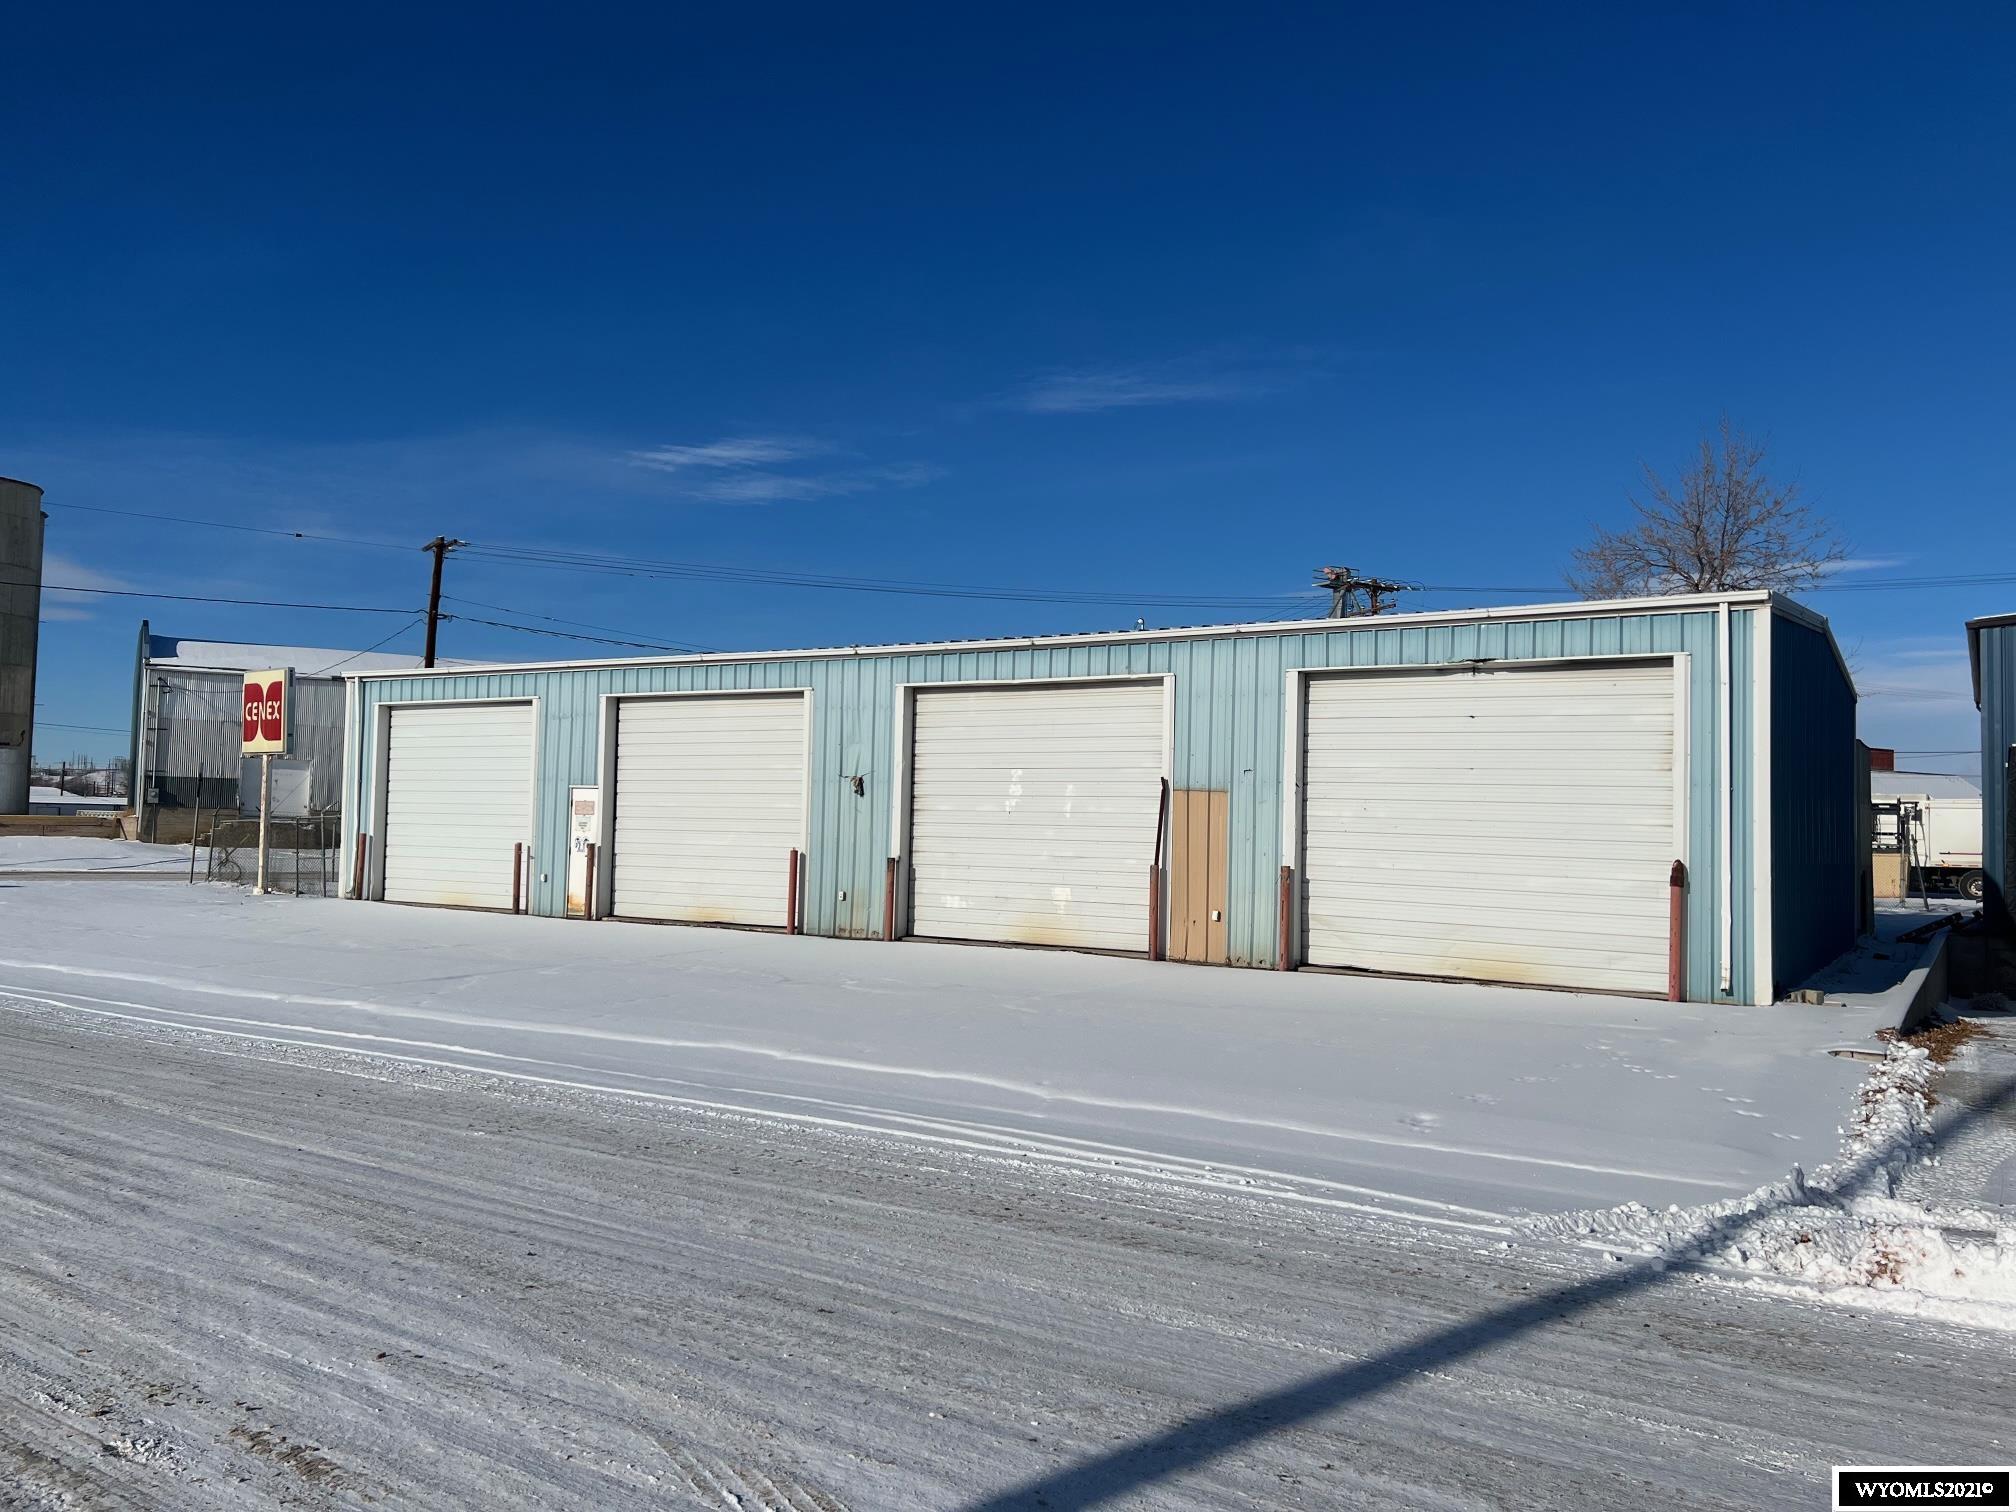 Two commercial properties being sold together.  One lot (0.3 acres) has heated 4-bay shop with office, restroom, and loft, as well as two additional storage buildings.  Other vacant lot (0.61 acres) directly across the street could be used for parking or is a blank slate for a new commercial building.  Zoned light industrial.